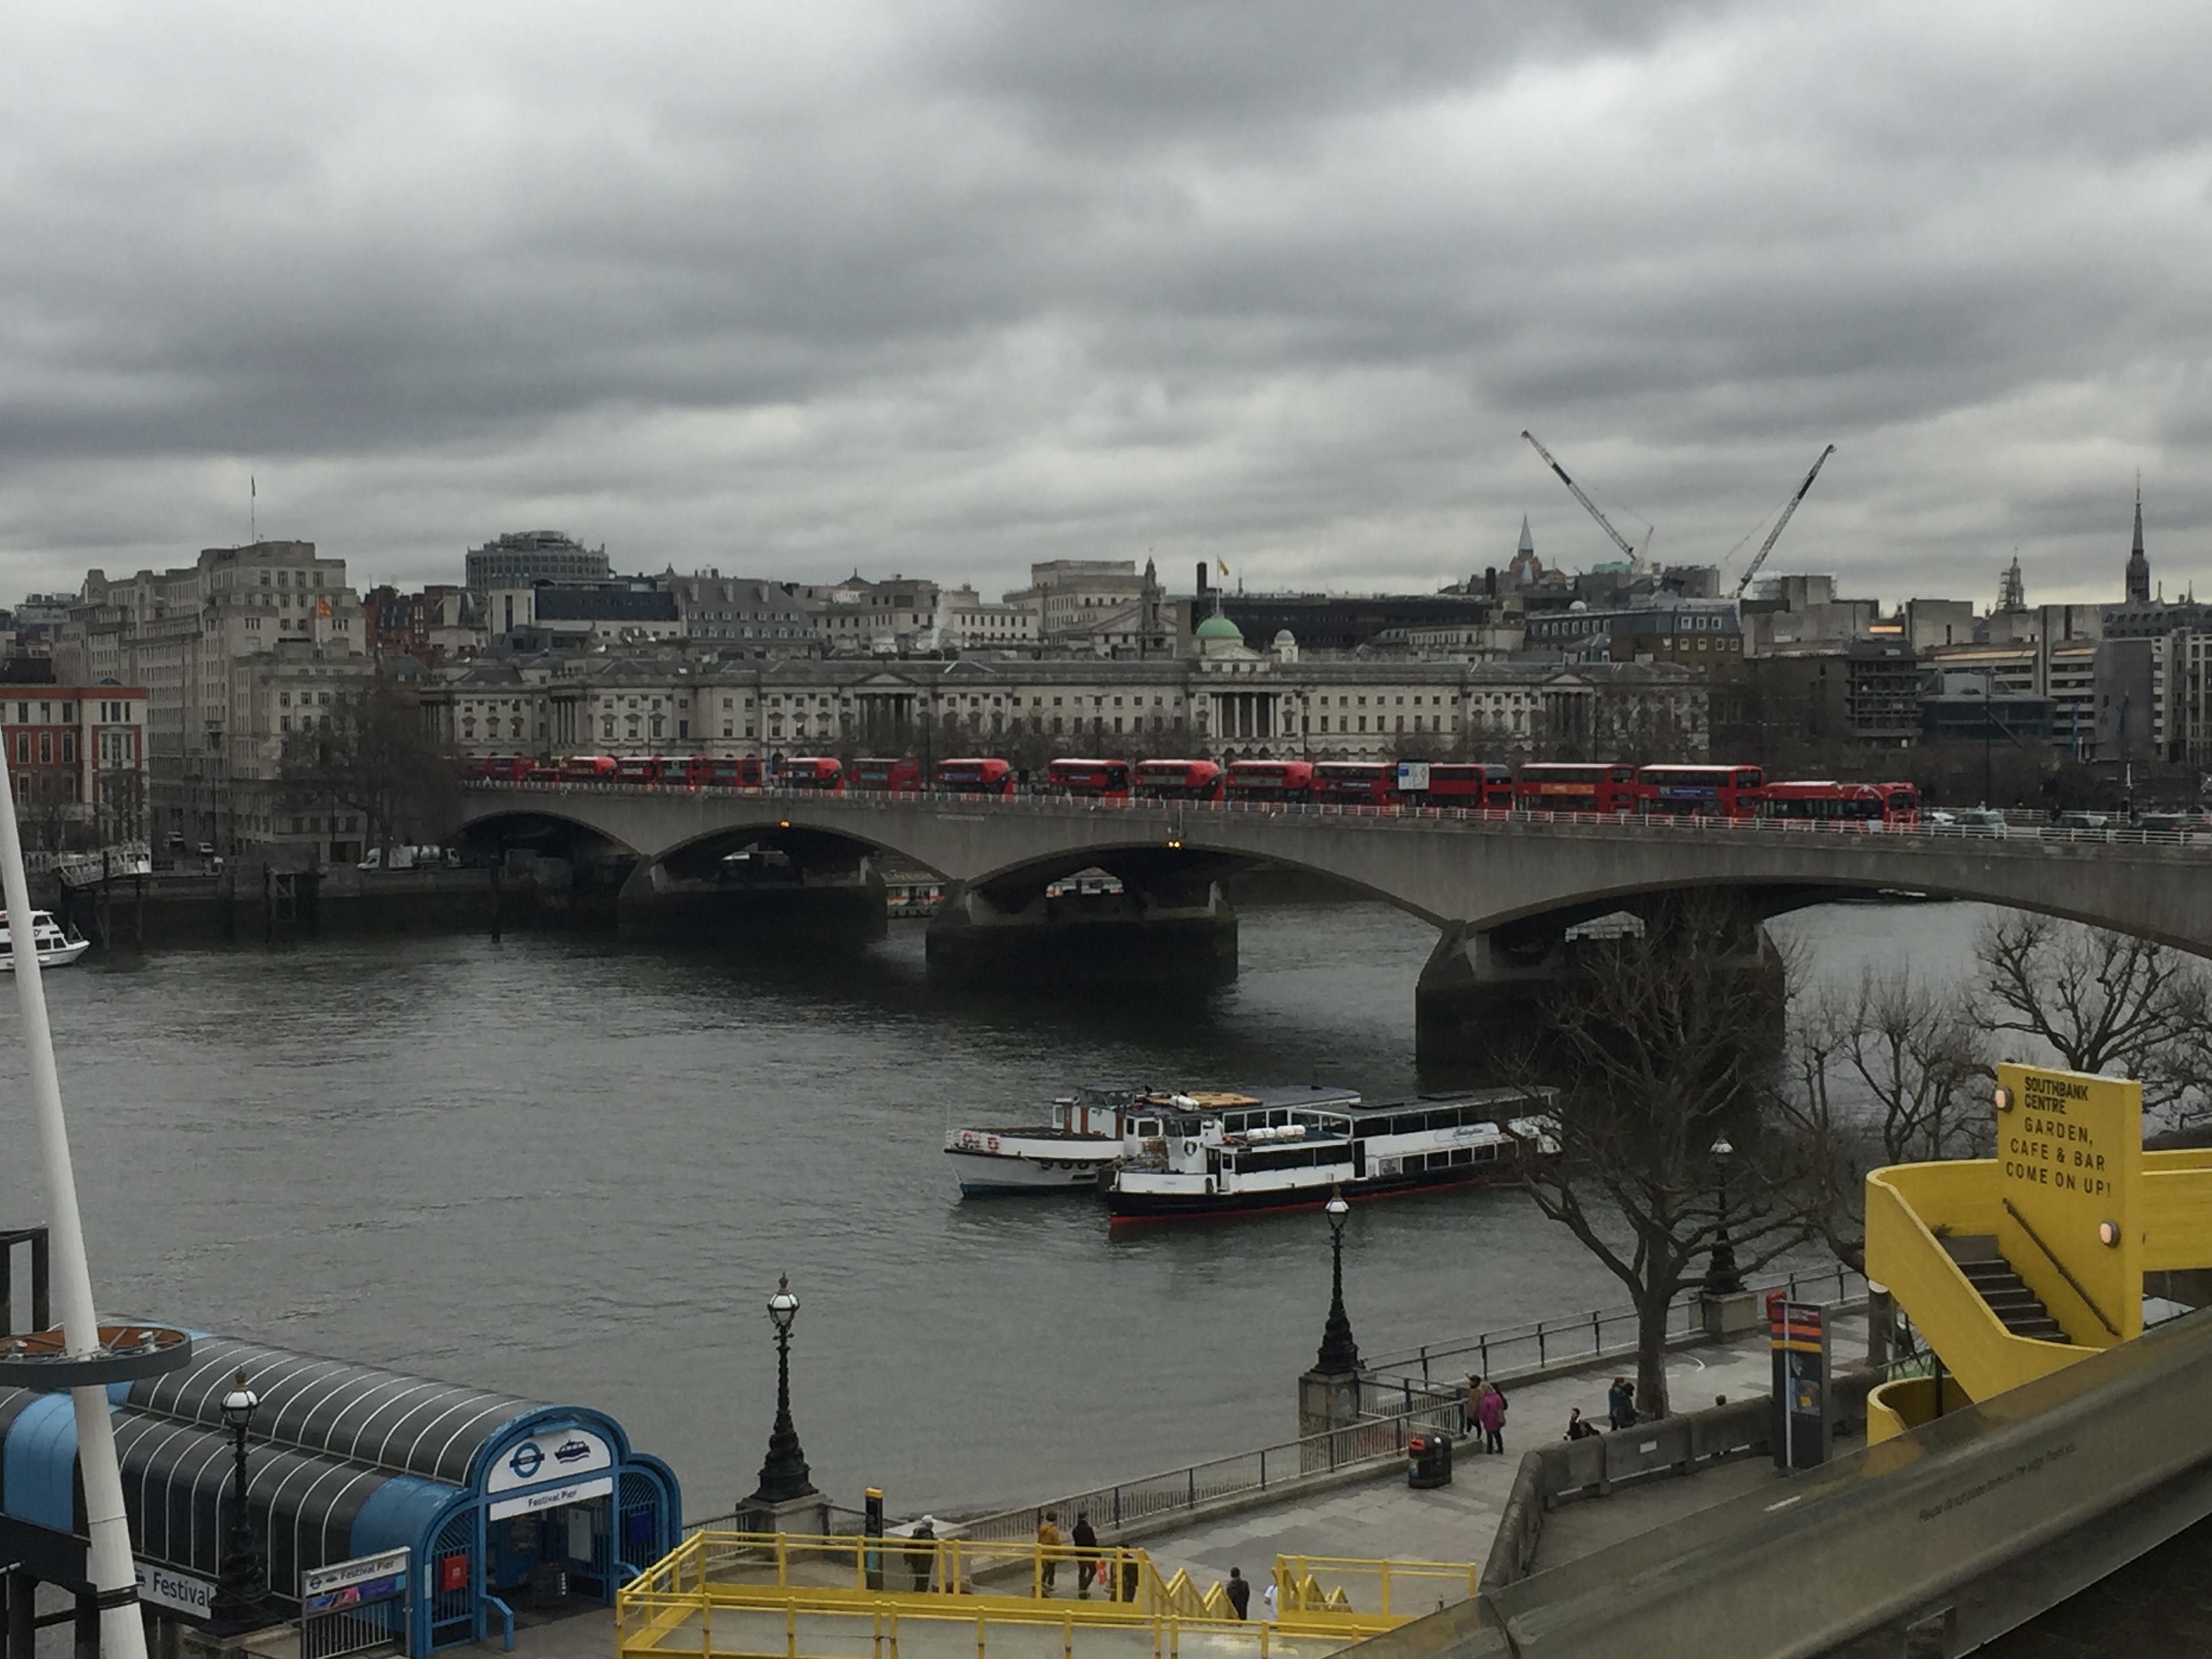 How many London buses does it take to scan Waterloo Bridge